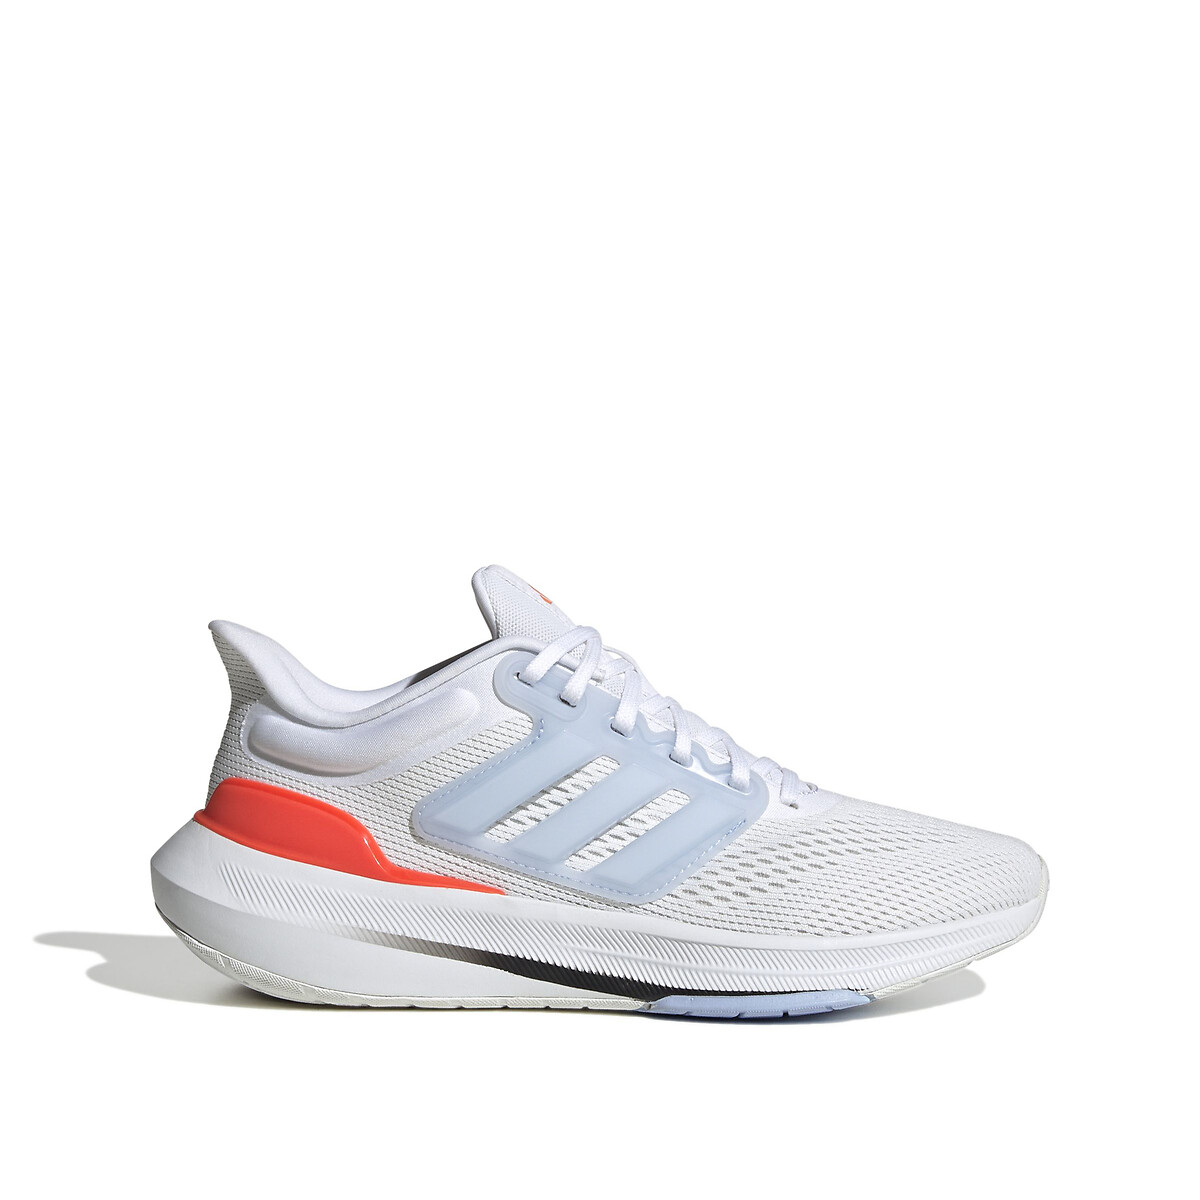 Ultrabounce trainers, white, Adidas Performance | La Redoute